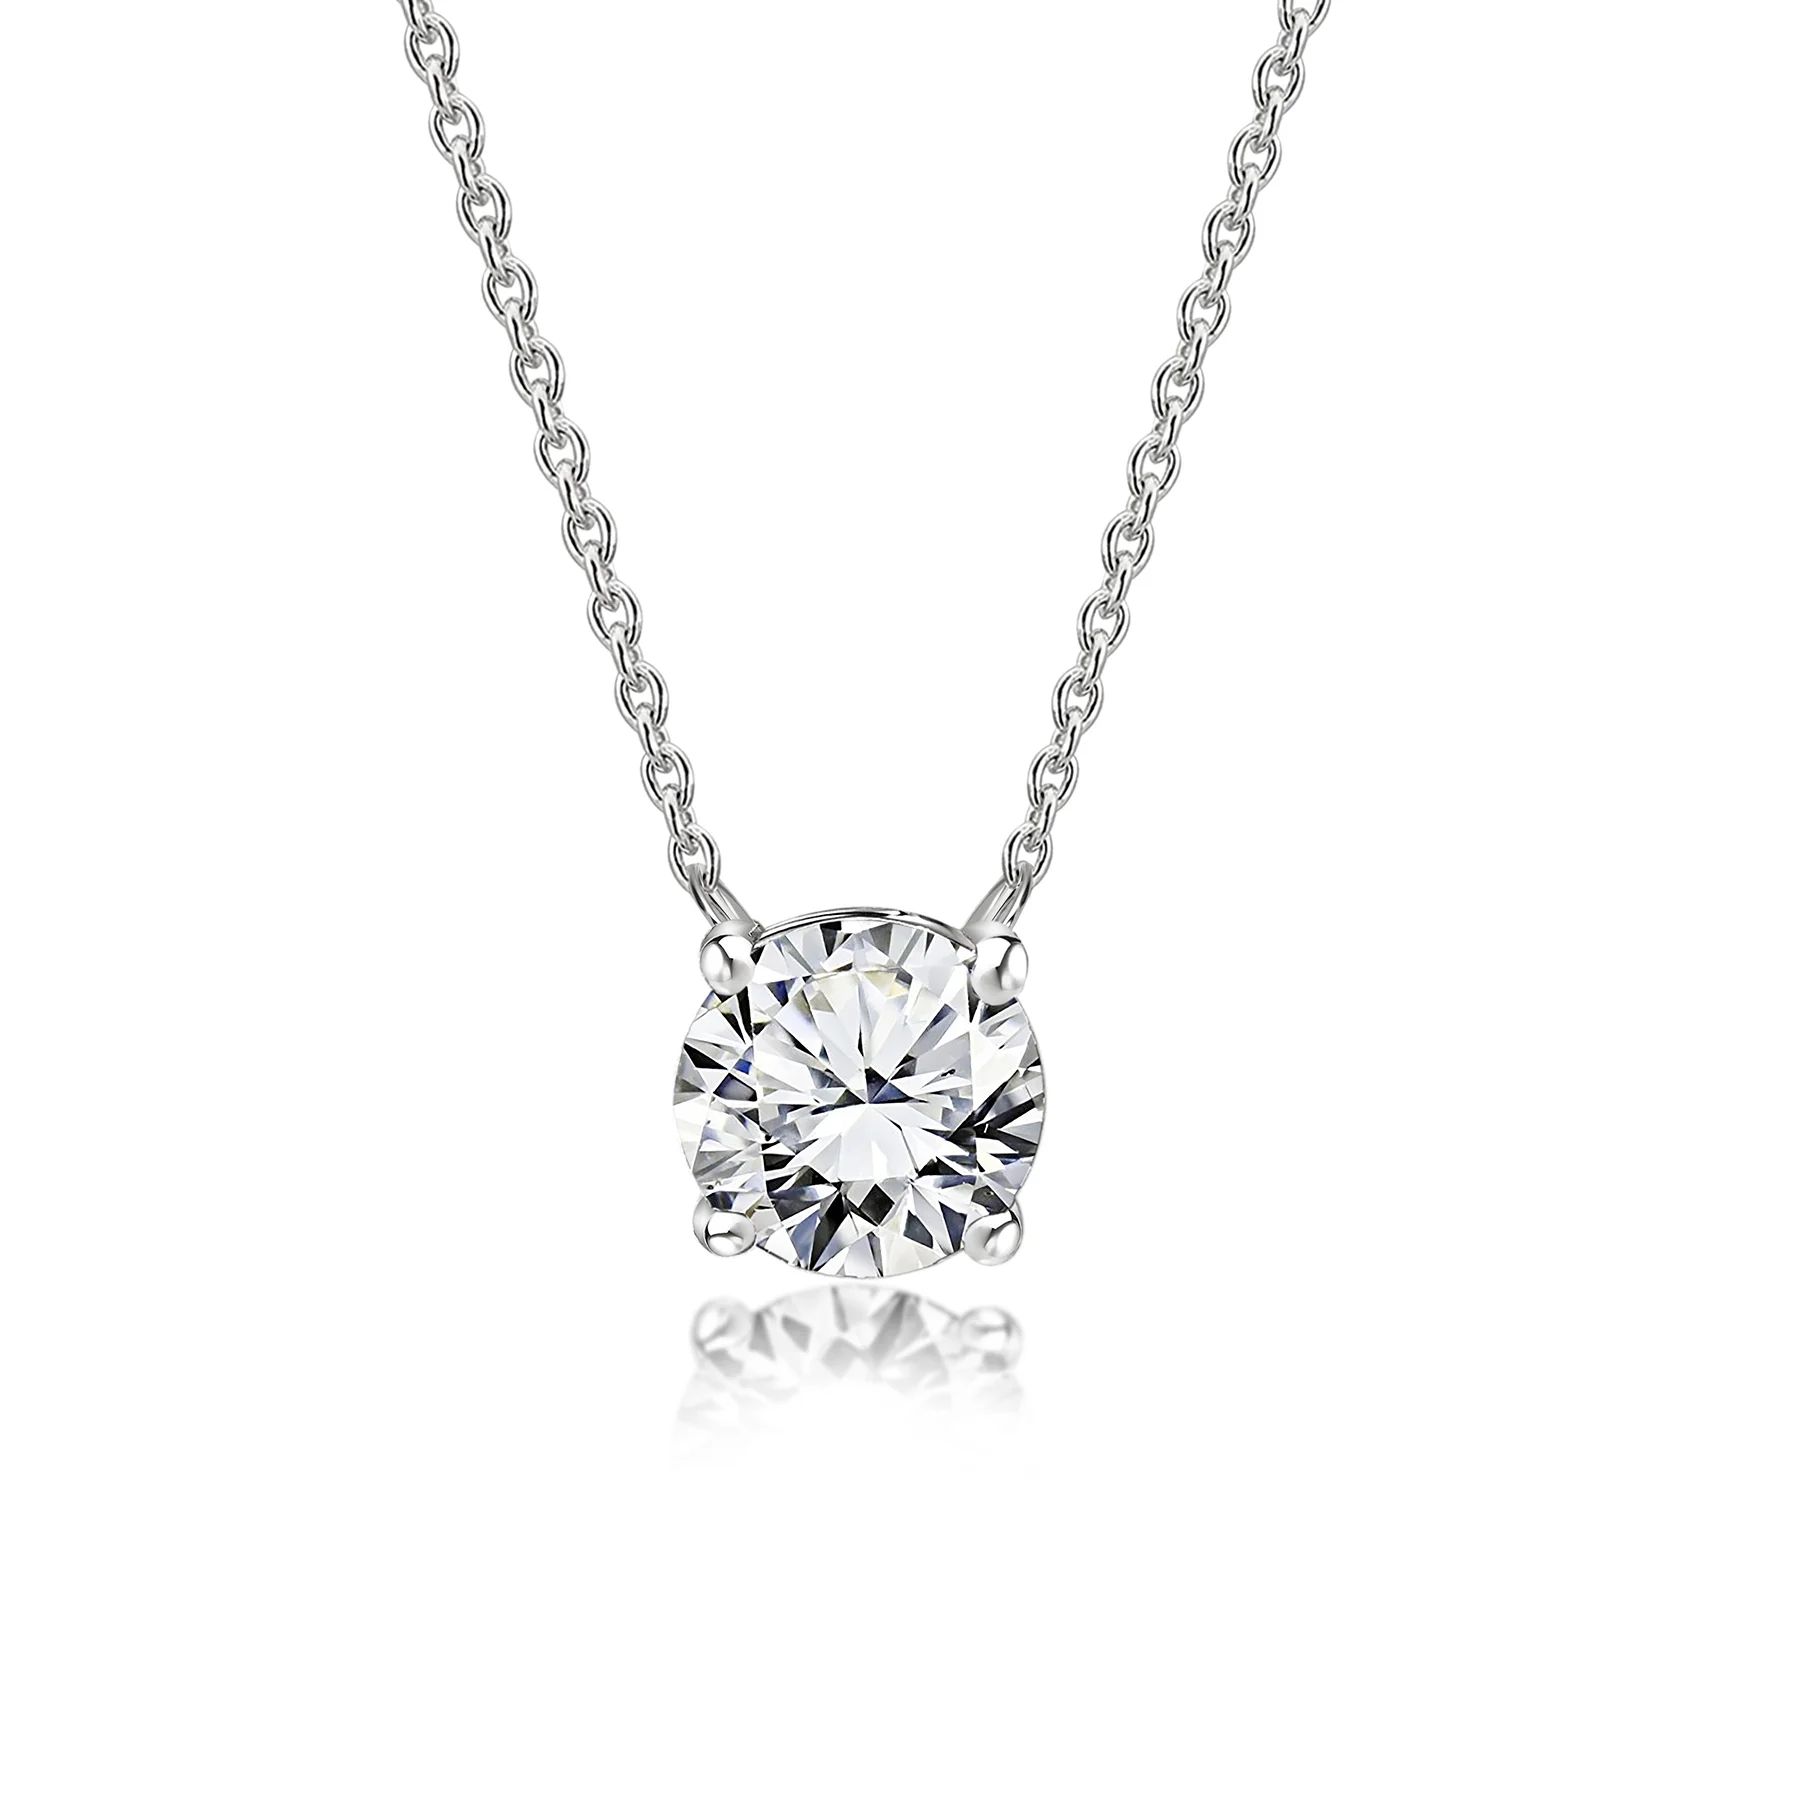 JeenMata 1 Carat Round Cut Moissanite Solitaire Pendant Necklace in 18k White Gold over Silver, F... | Walmart (US)